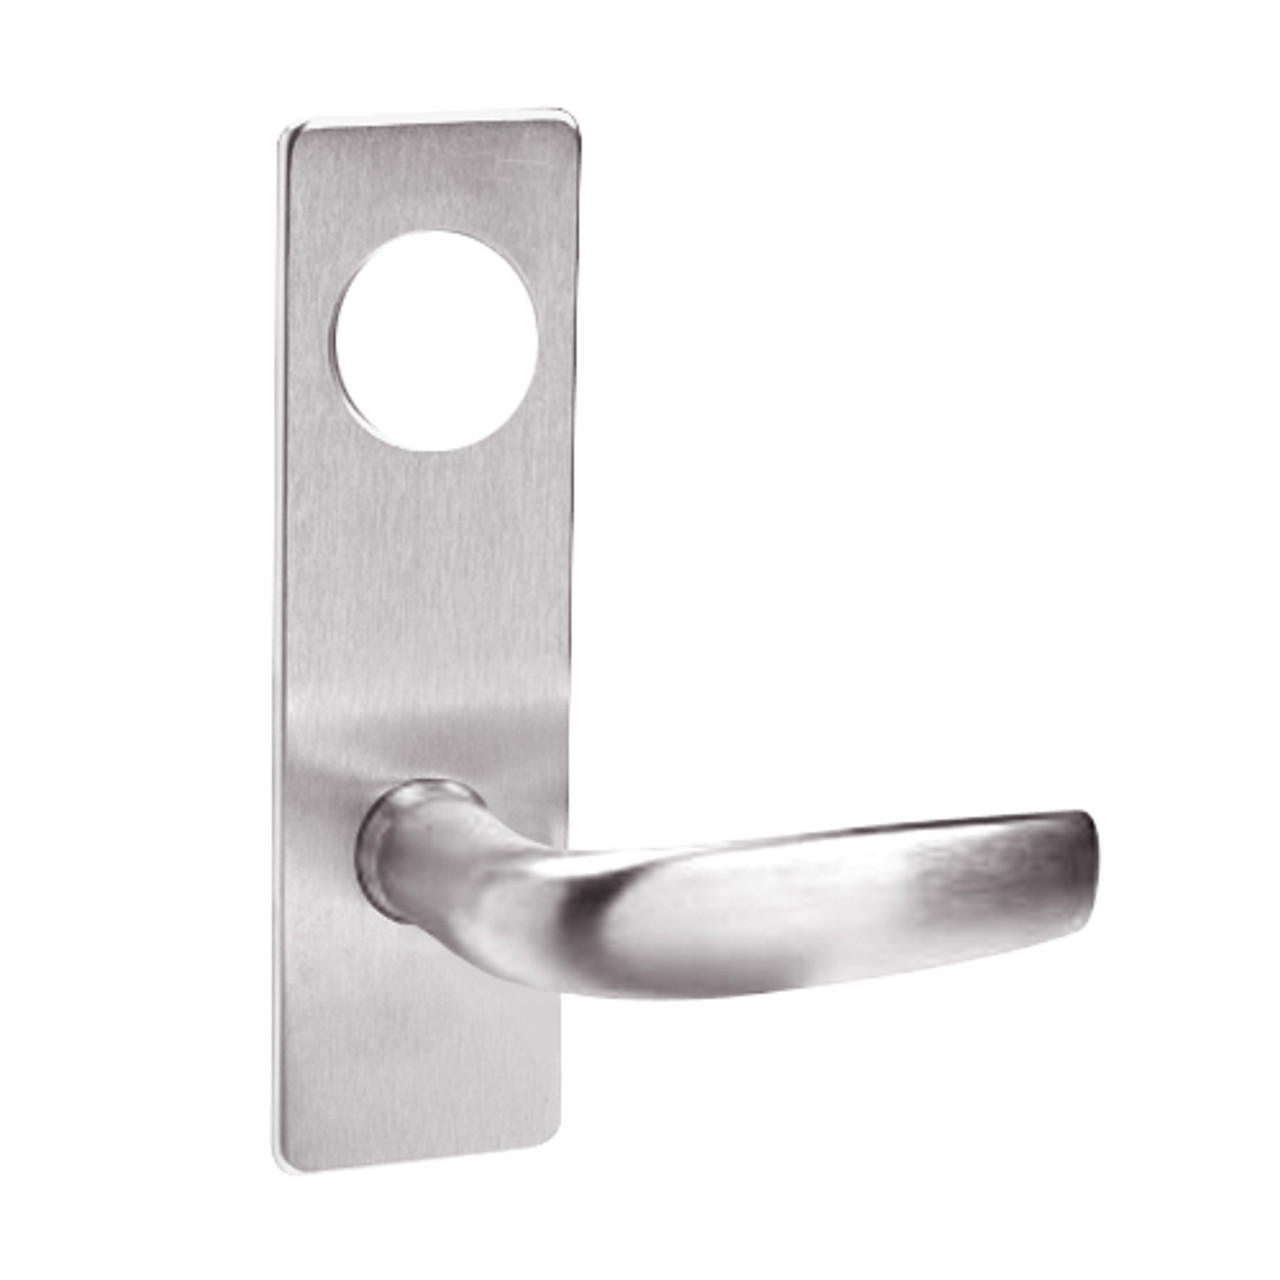 ML2069-CSM-629-CL7 Corbin Russwin ML2000 Series IC 7-Pin Less Core Mortise Institution Privacy Locksets with Citation Lever in Bright Stainless Steel